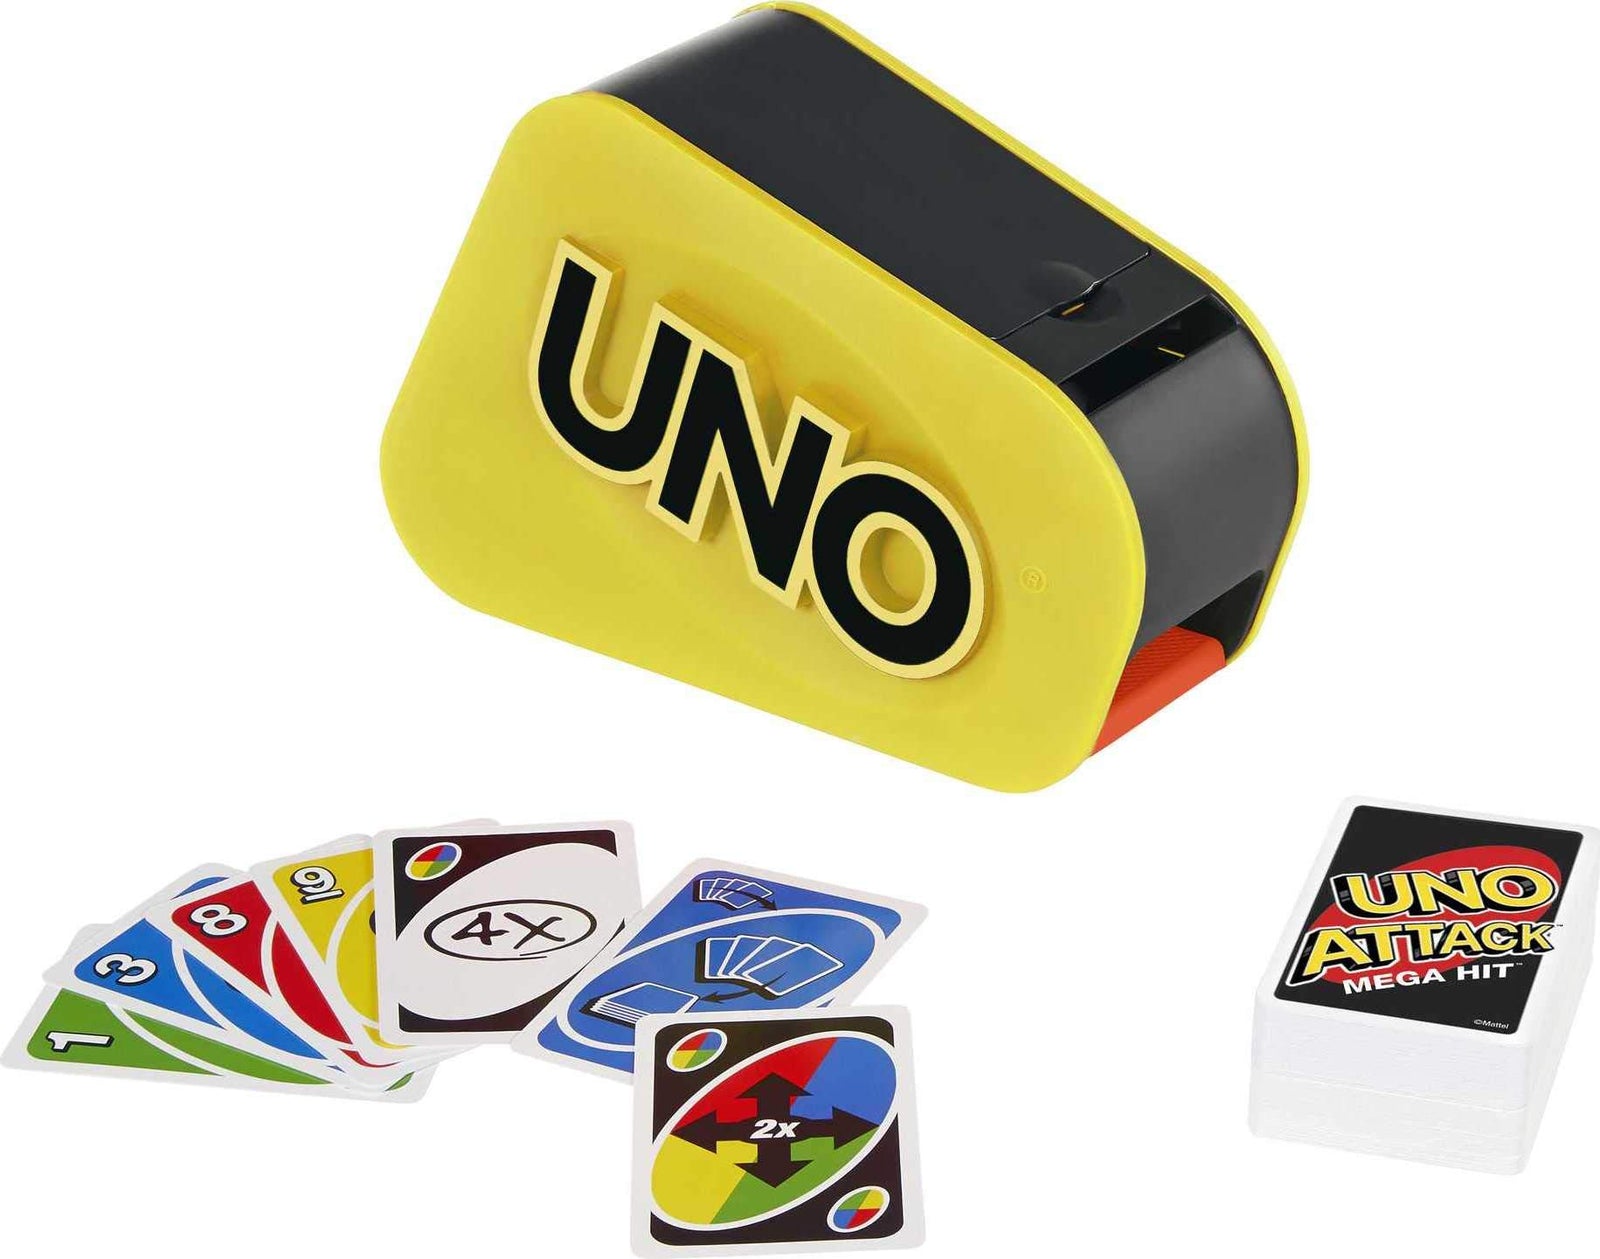 UNO Attack Mega Hit Card Game with Random-Action Launcher with Lights & Sounds & 112 Cards, Kid, Teen & Adult Game Night Gift Ages 7 Years & Older [Amazon Exclusive]